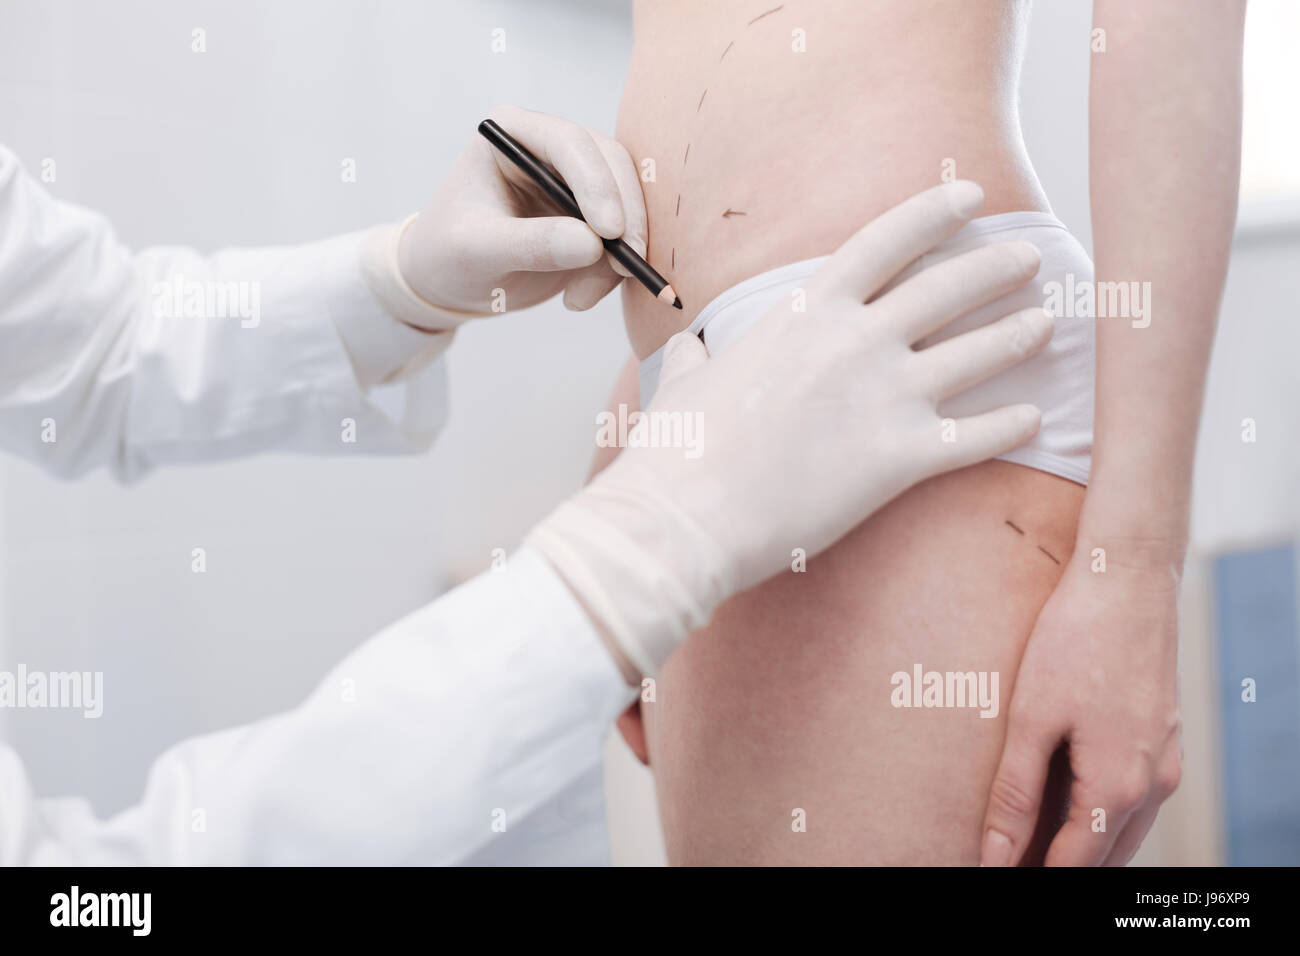 Delicate excellent specialist marking the guidelines for surgery Stock Photo